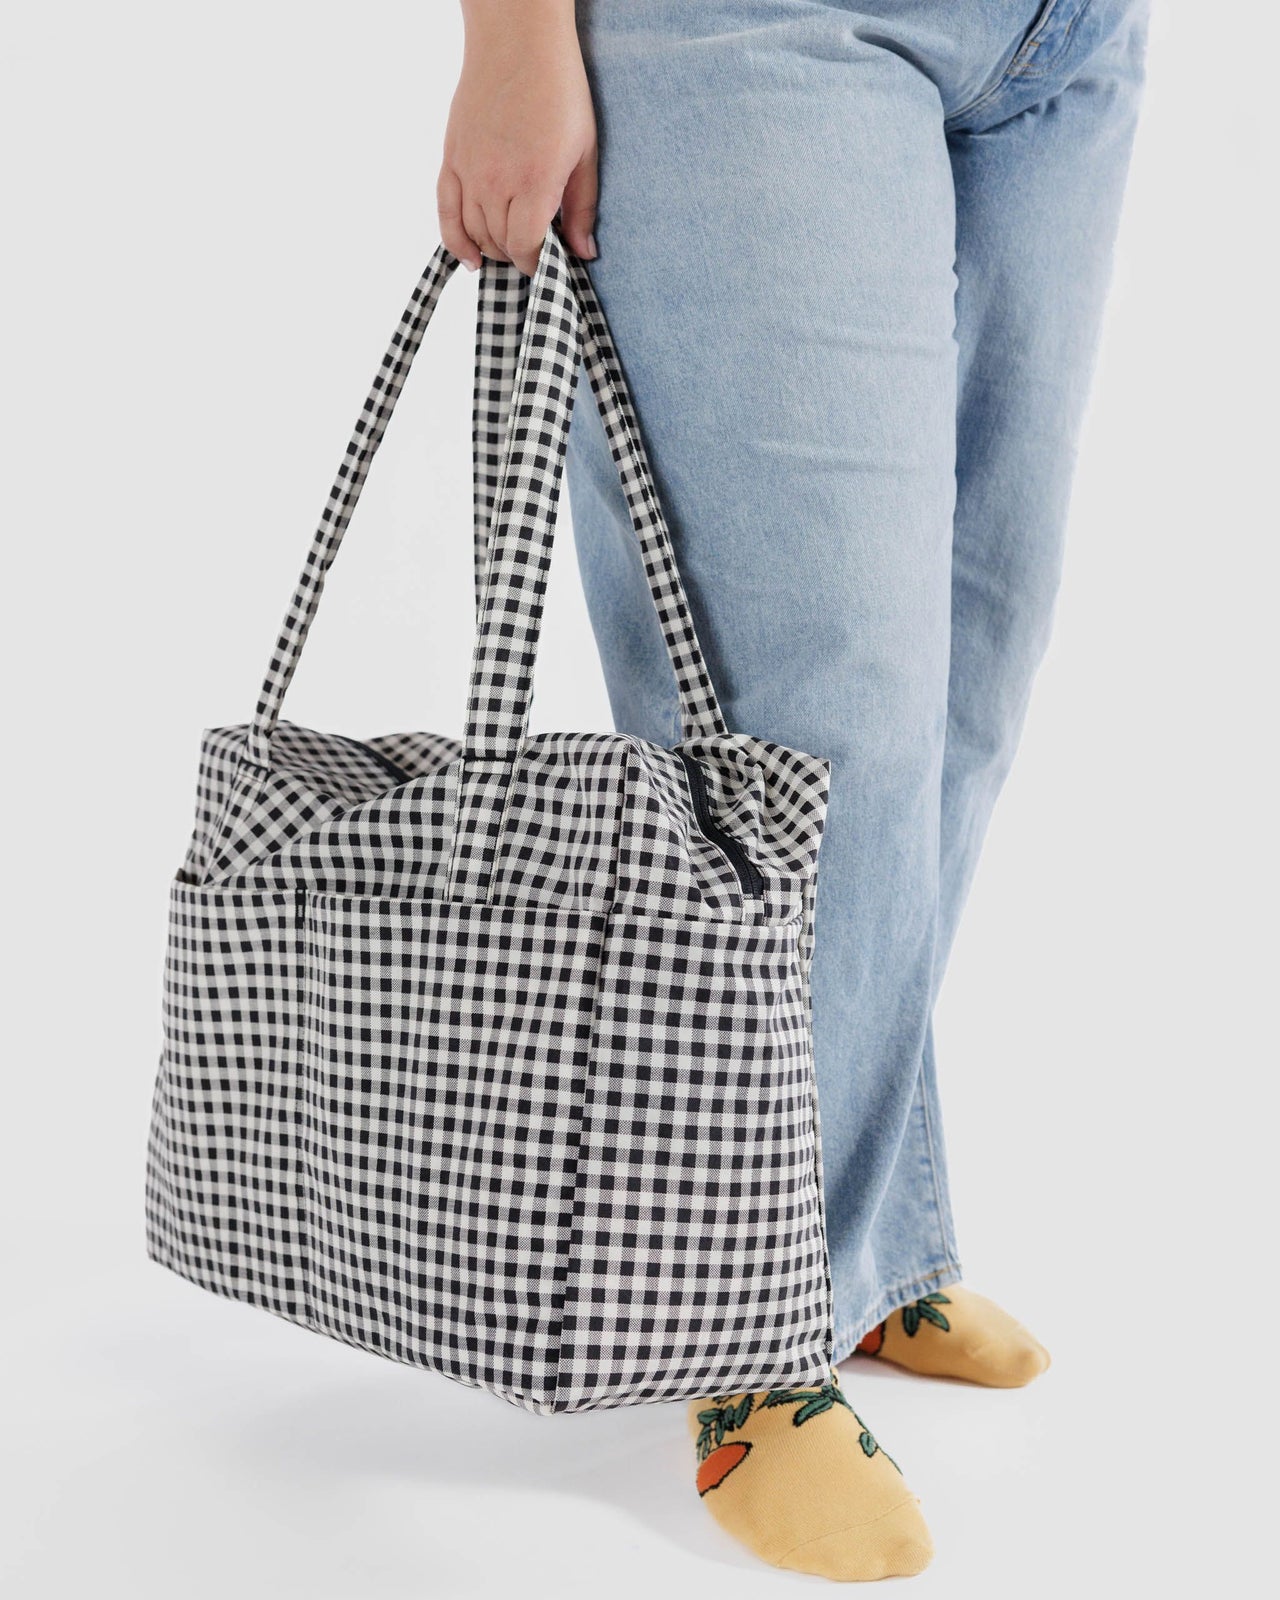 Cloud Carry-on - Black & White Gingham